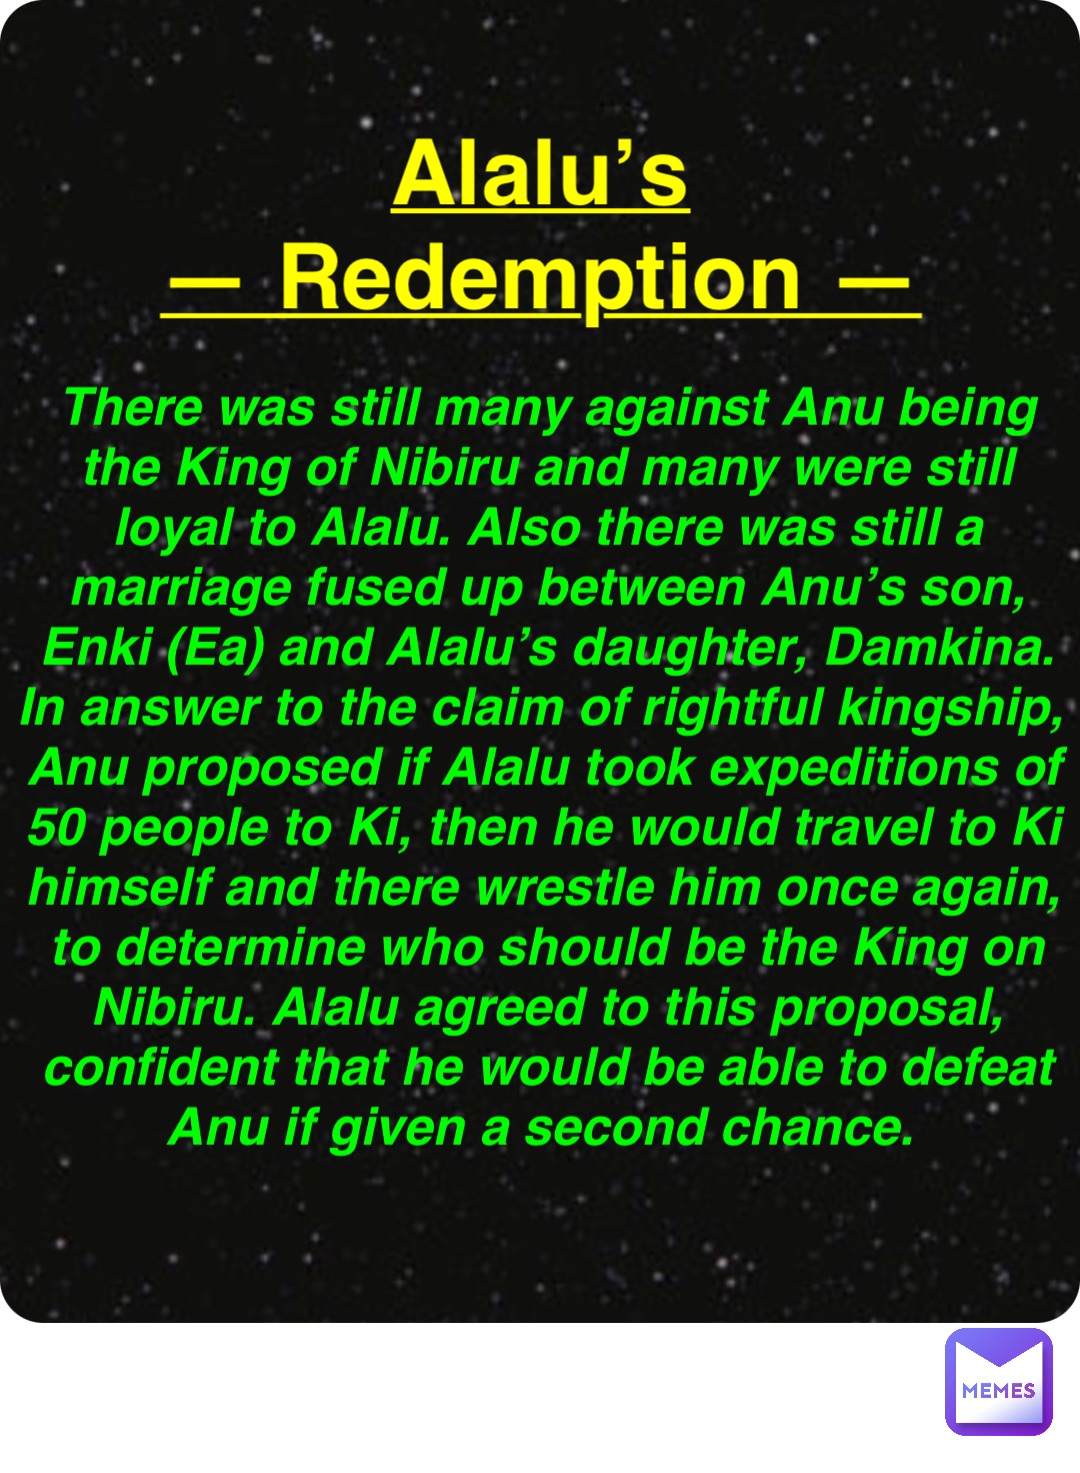 Double tap to edit Alalu’s
— Redemption — There was still many against Anu being the King of Nibiru and many were still loyal to Alalu. Also there was still a marriage fused up between Anu’s son, Enki (Ea) and Alalu’s daughter, Damkina. In answer to the claim of rightful kingship, Anu proposed if Alalu took expeditions of 50 people to Ki, then he would travel to Ki himself and there wrestle him once again, to determine who should be the King on Nibiru. Alalu agreed to this proposal, confident that he would be able to defeat Anu if given a second chance.